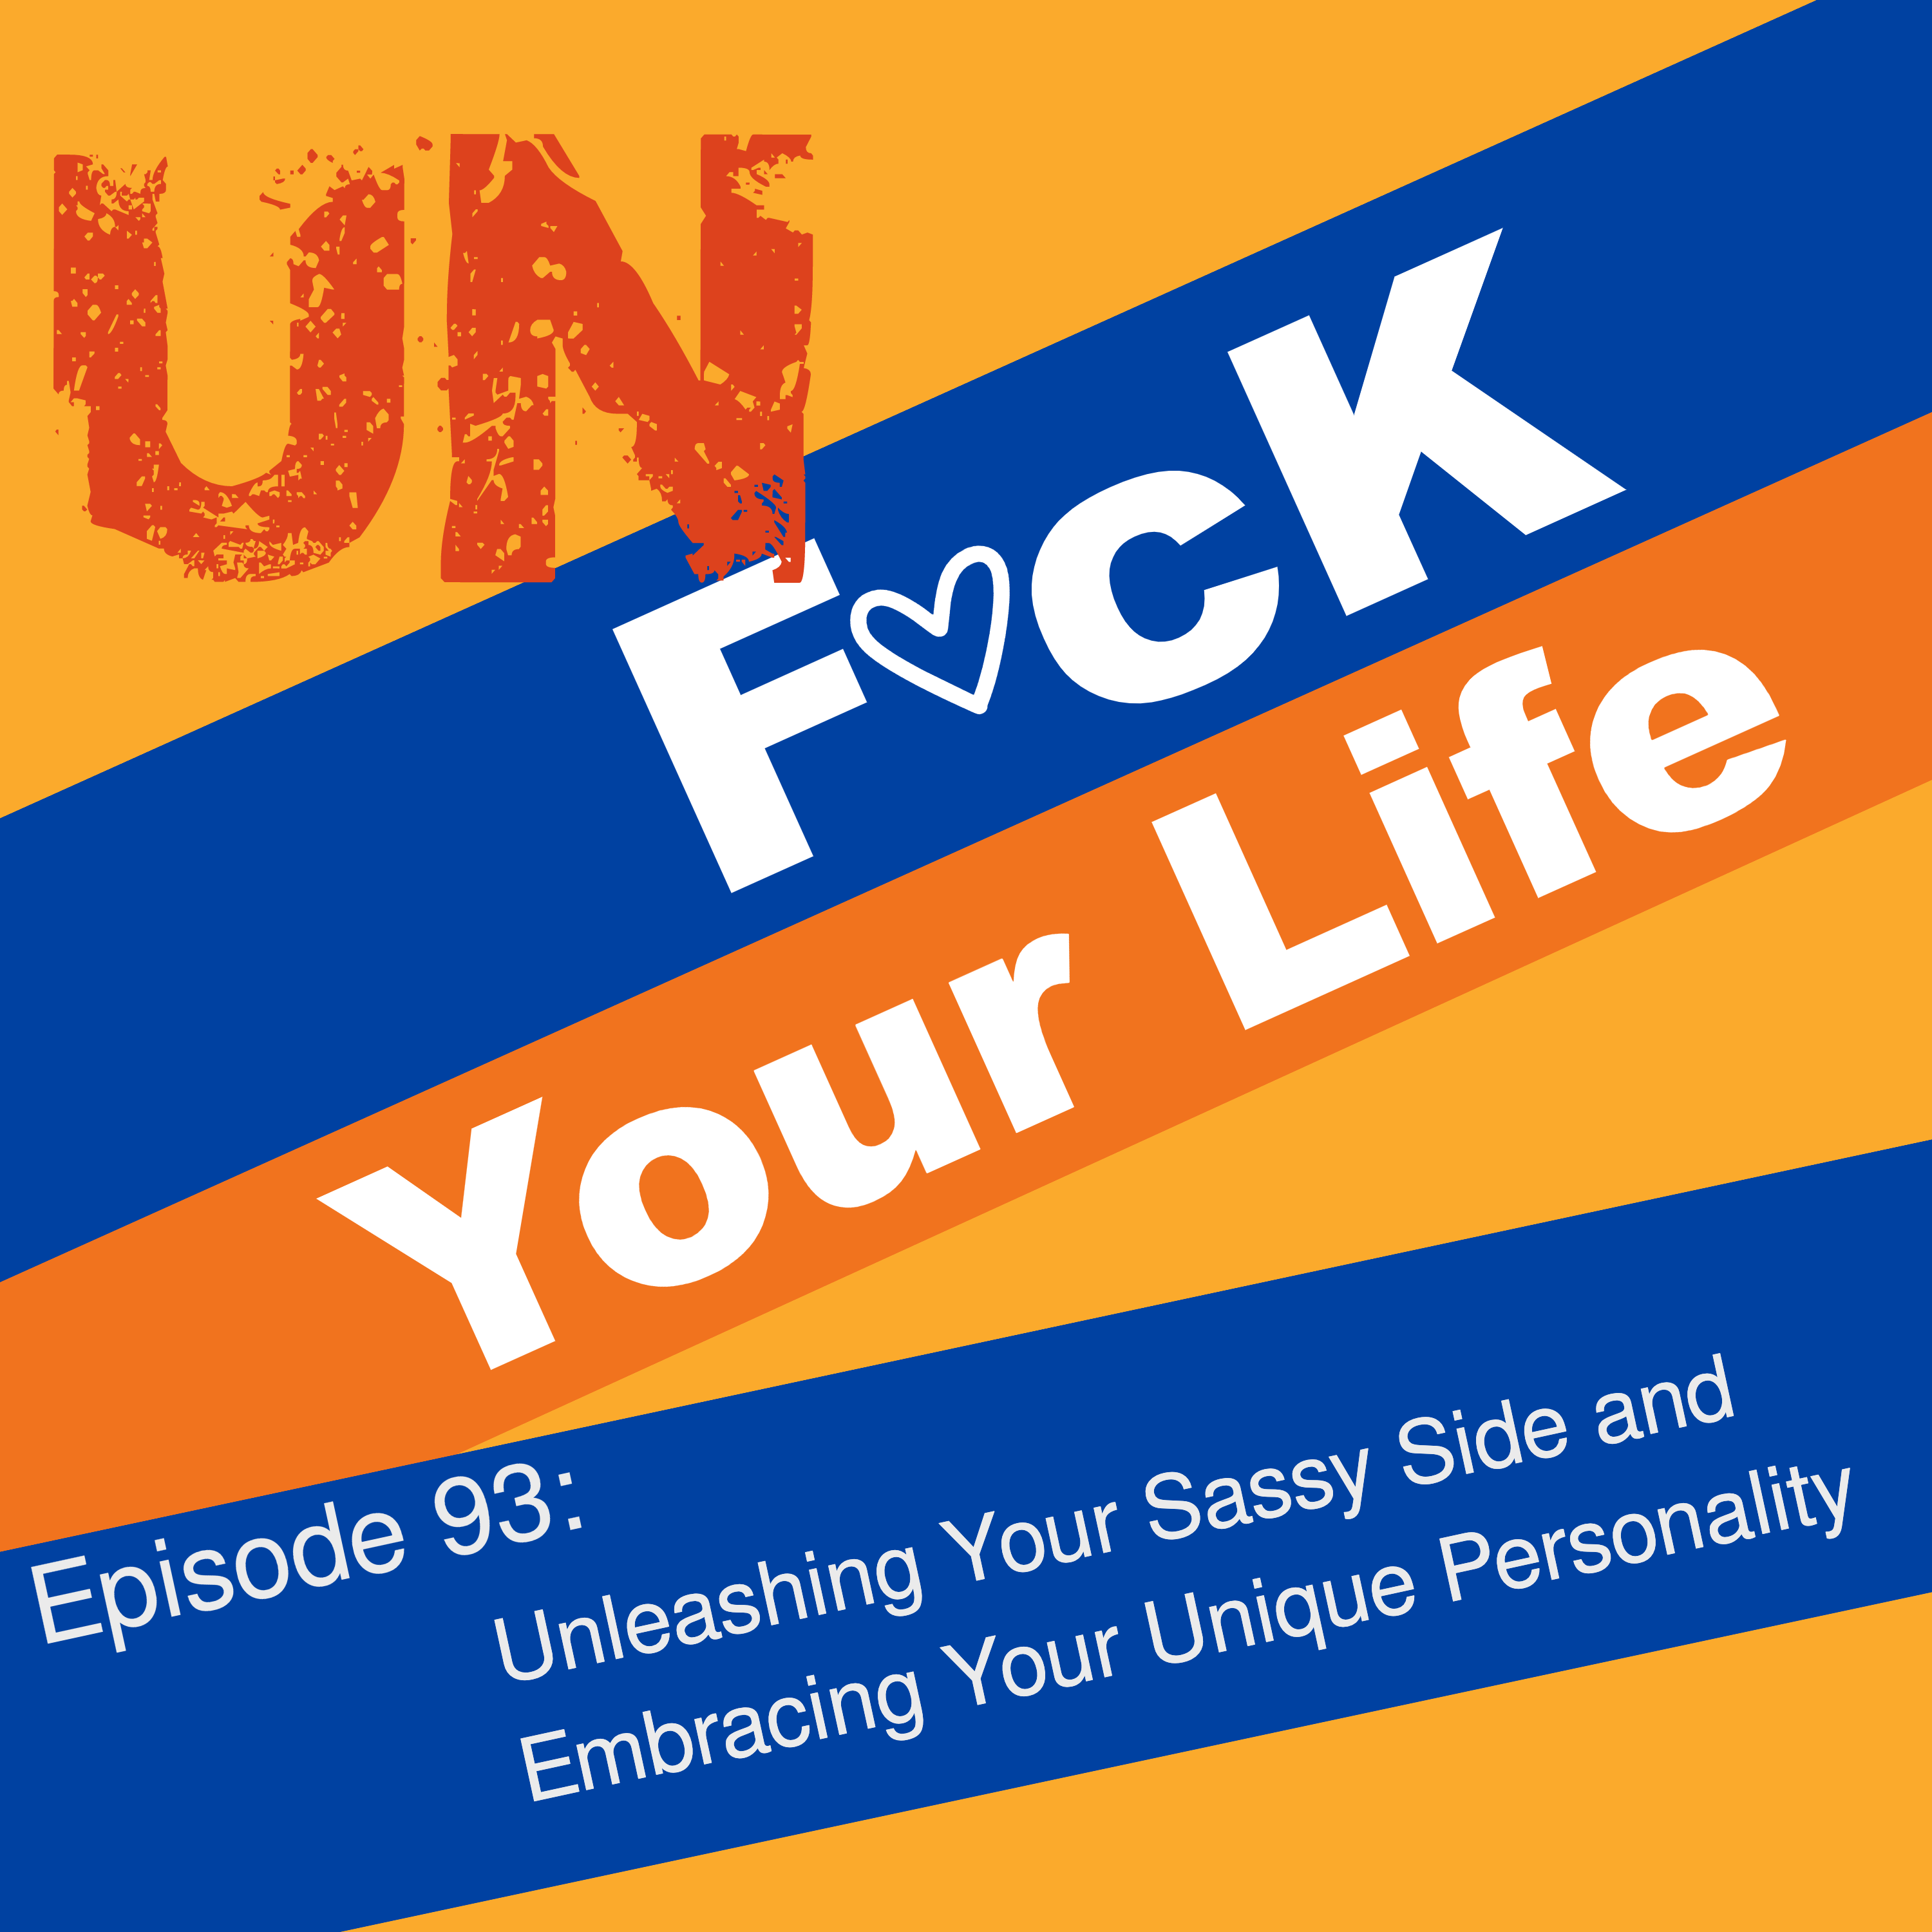 Ep: 93: Unleashing Your Sassy Side and Embracing Your Unique Personality